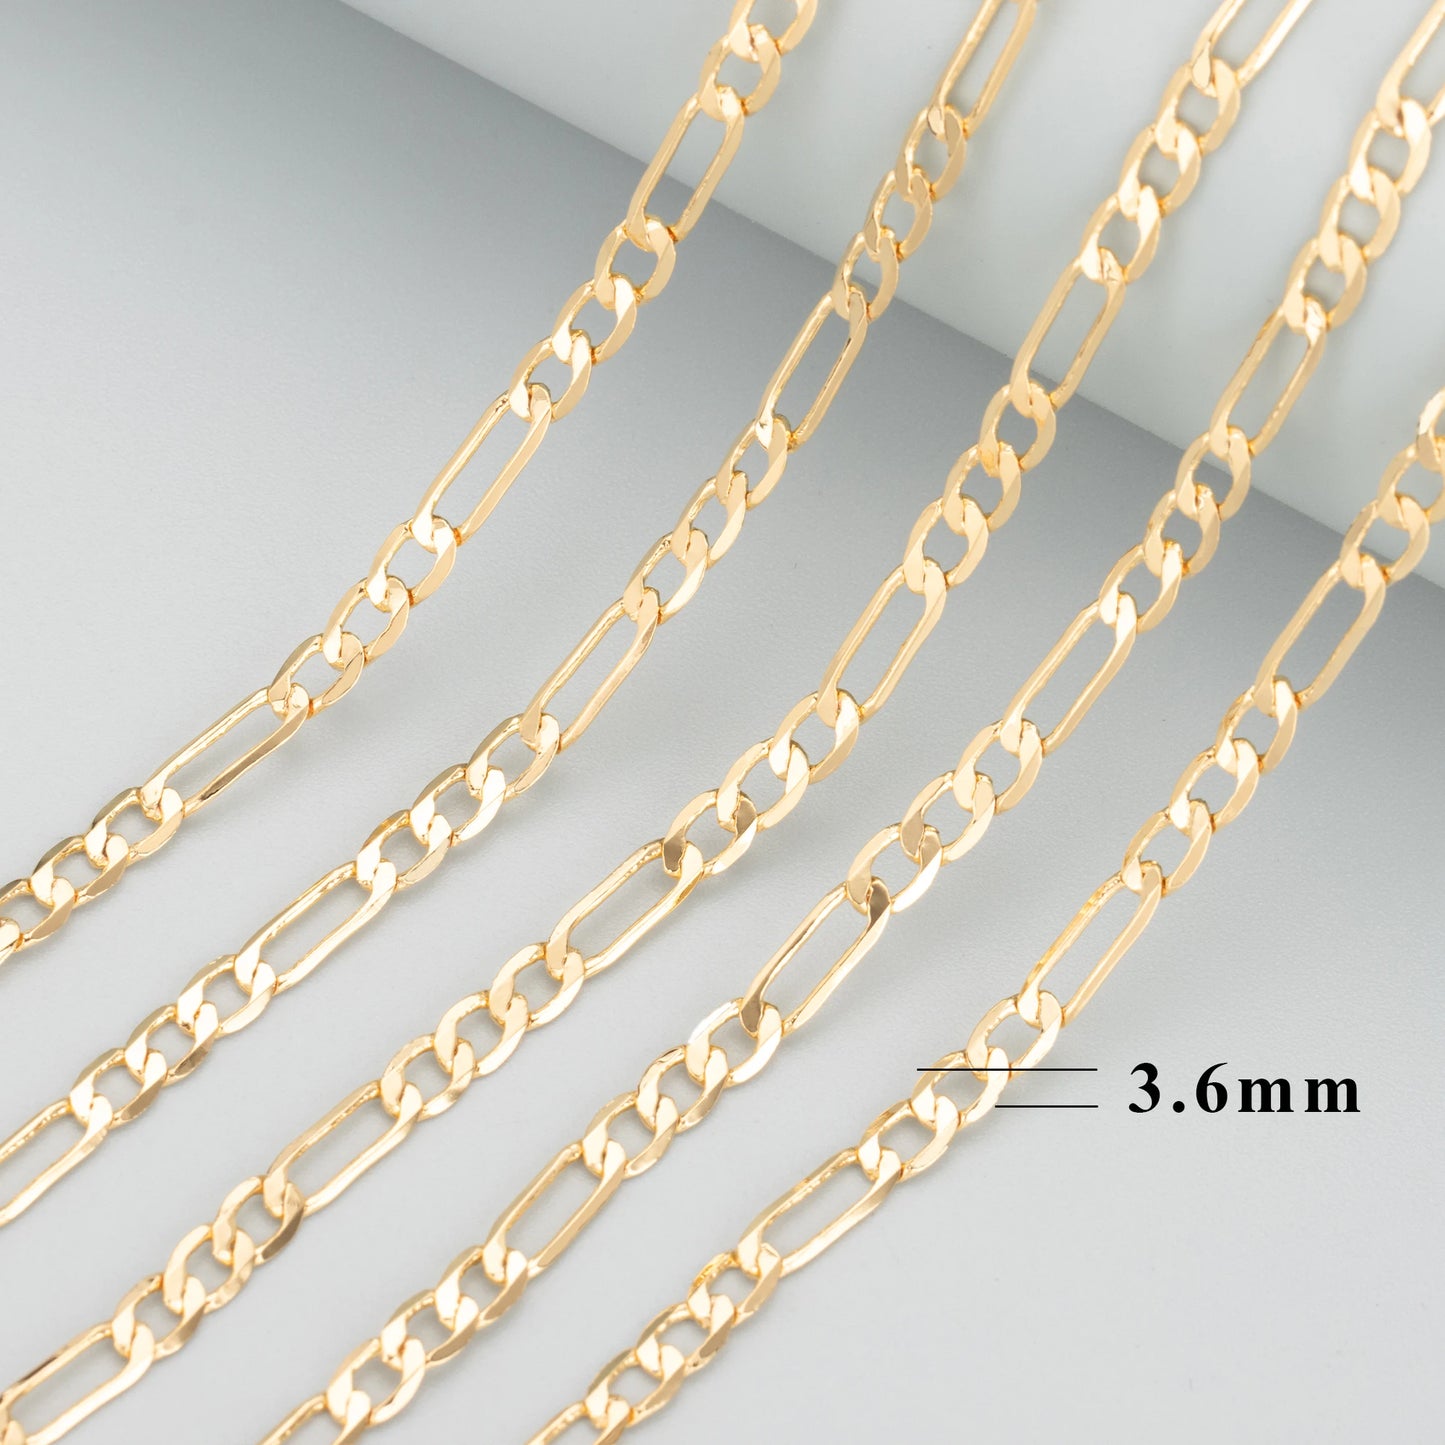 GUFEATHER C143,jewelry accessories,pass REACH,nickel free,diy chain,18k gold plate,diy bracelet necklace,jewelry making,3m/lot